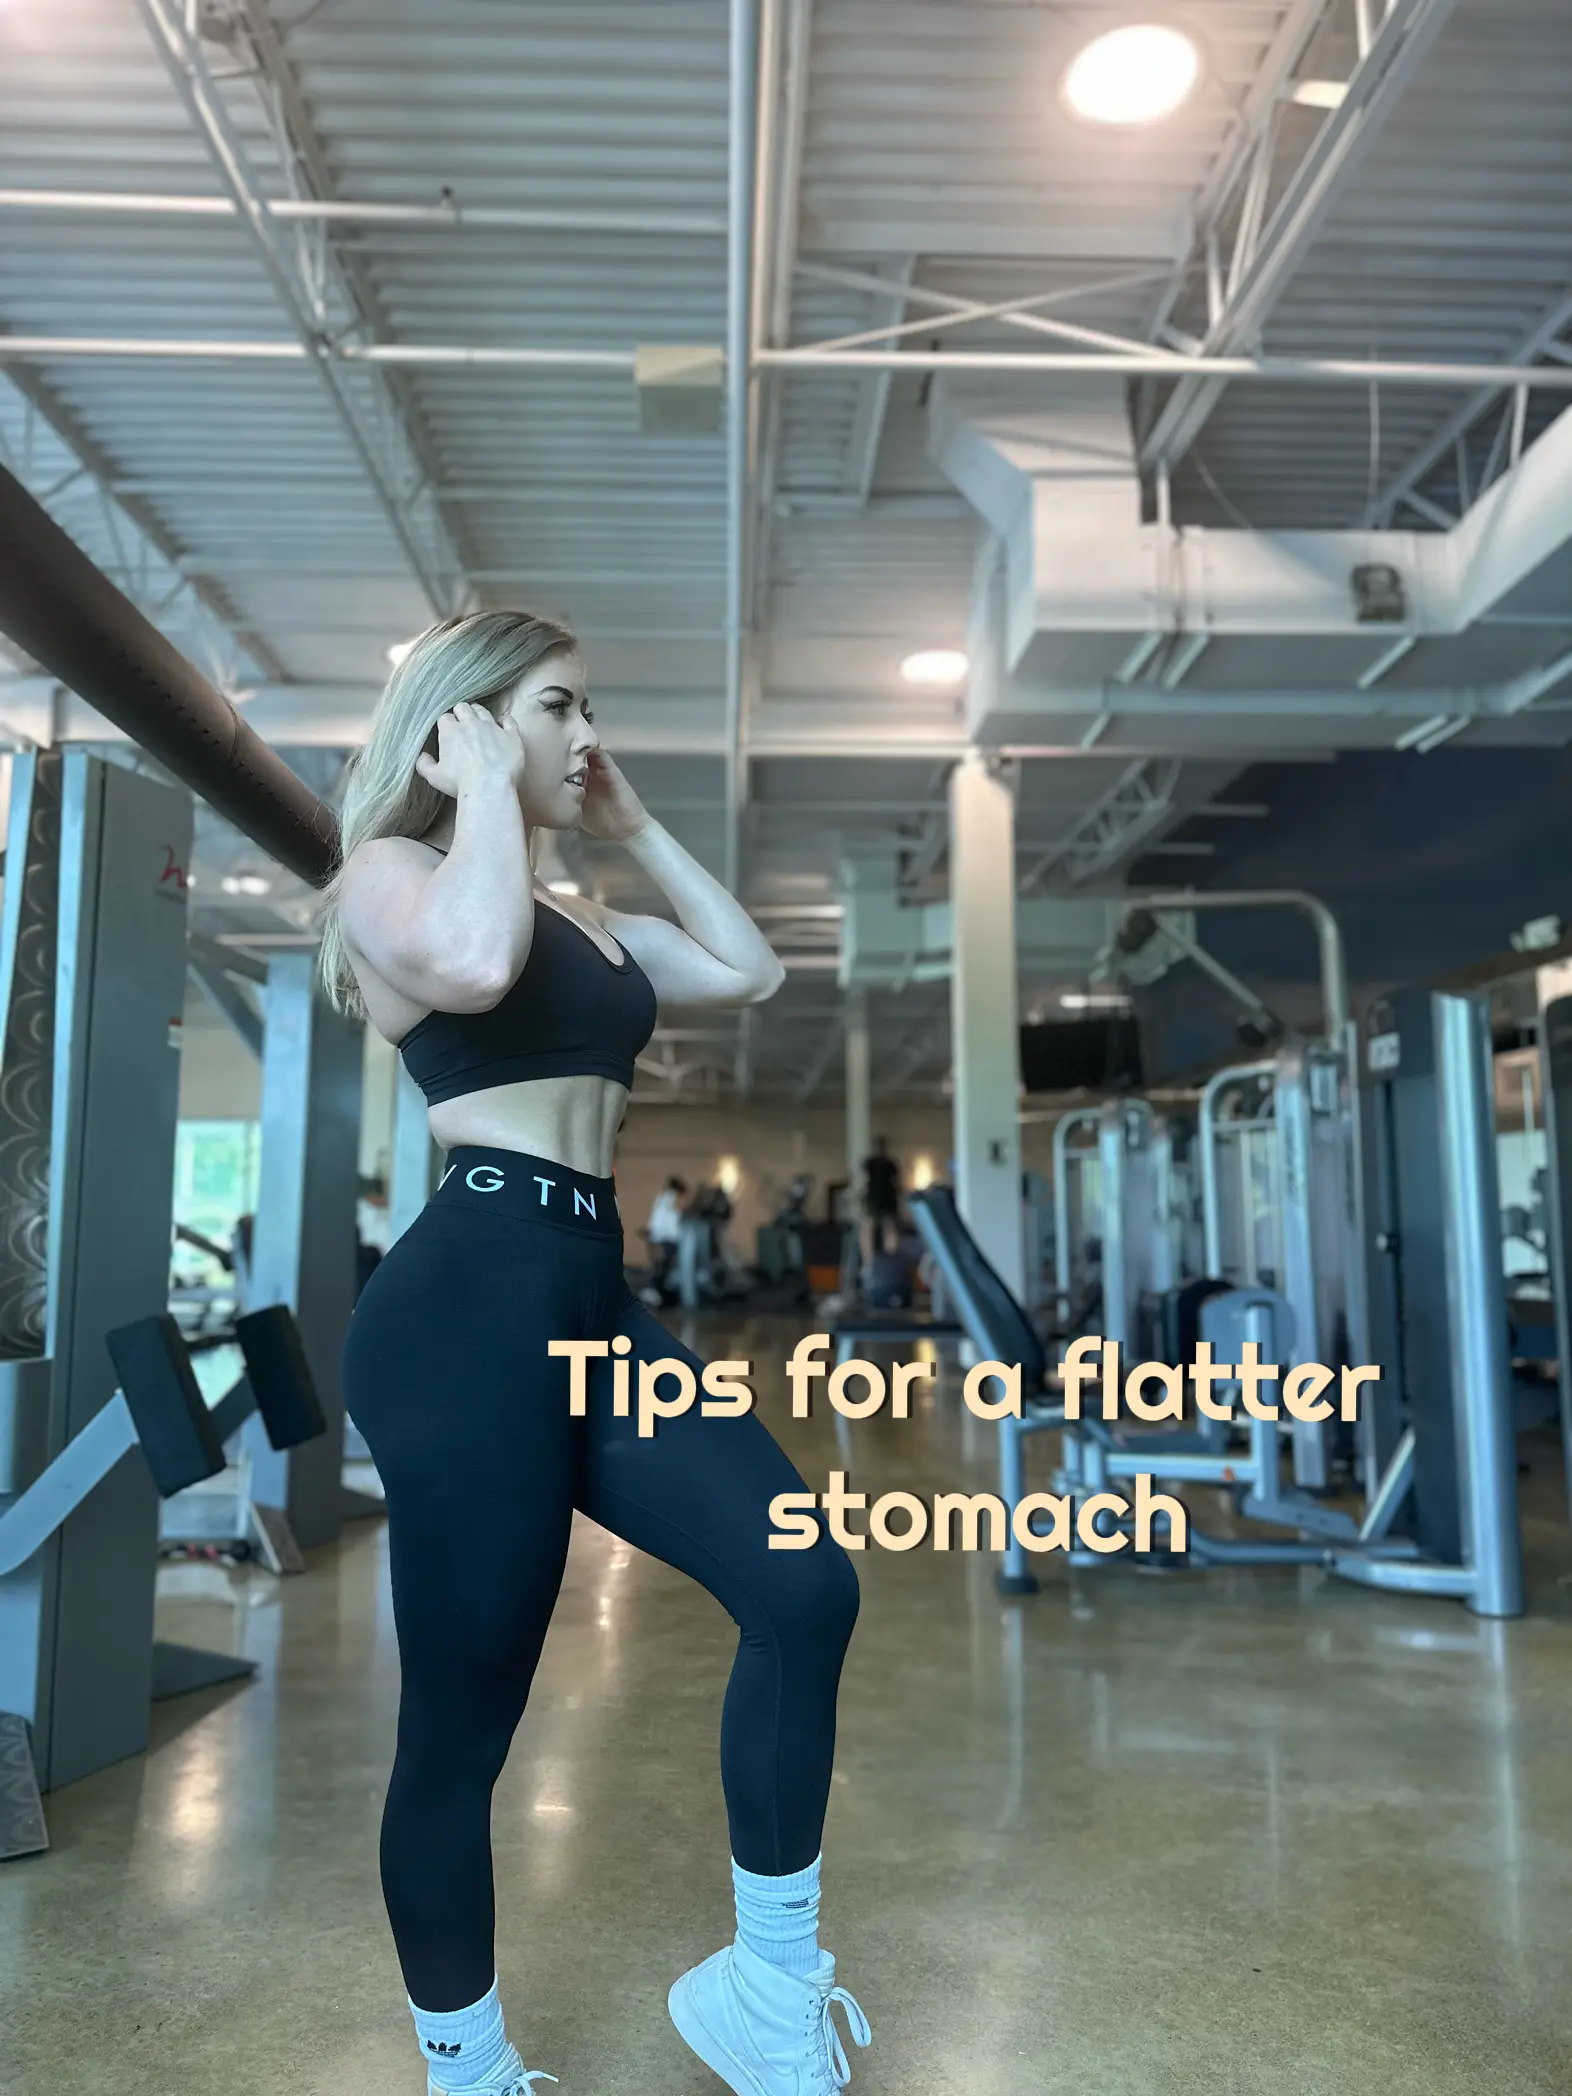 HOW TO TONE UP YOUR STOMACH!  Gallery posted by Hannah Hooker